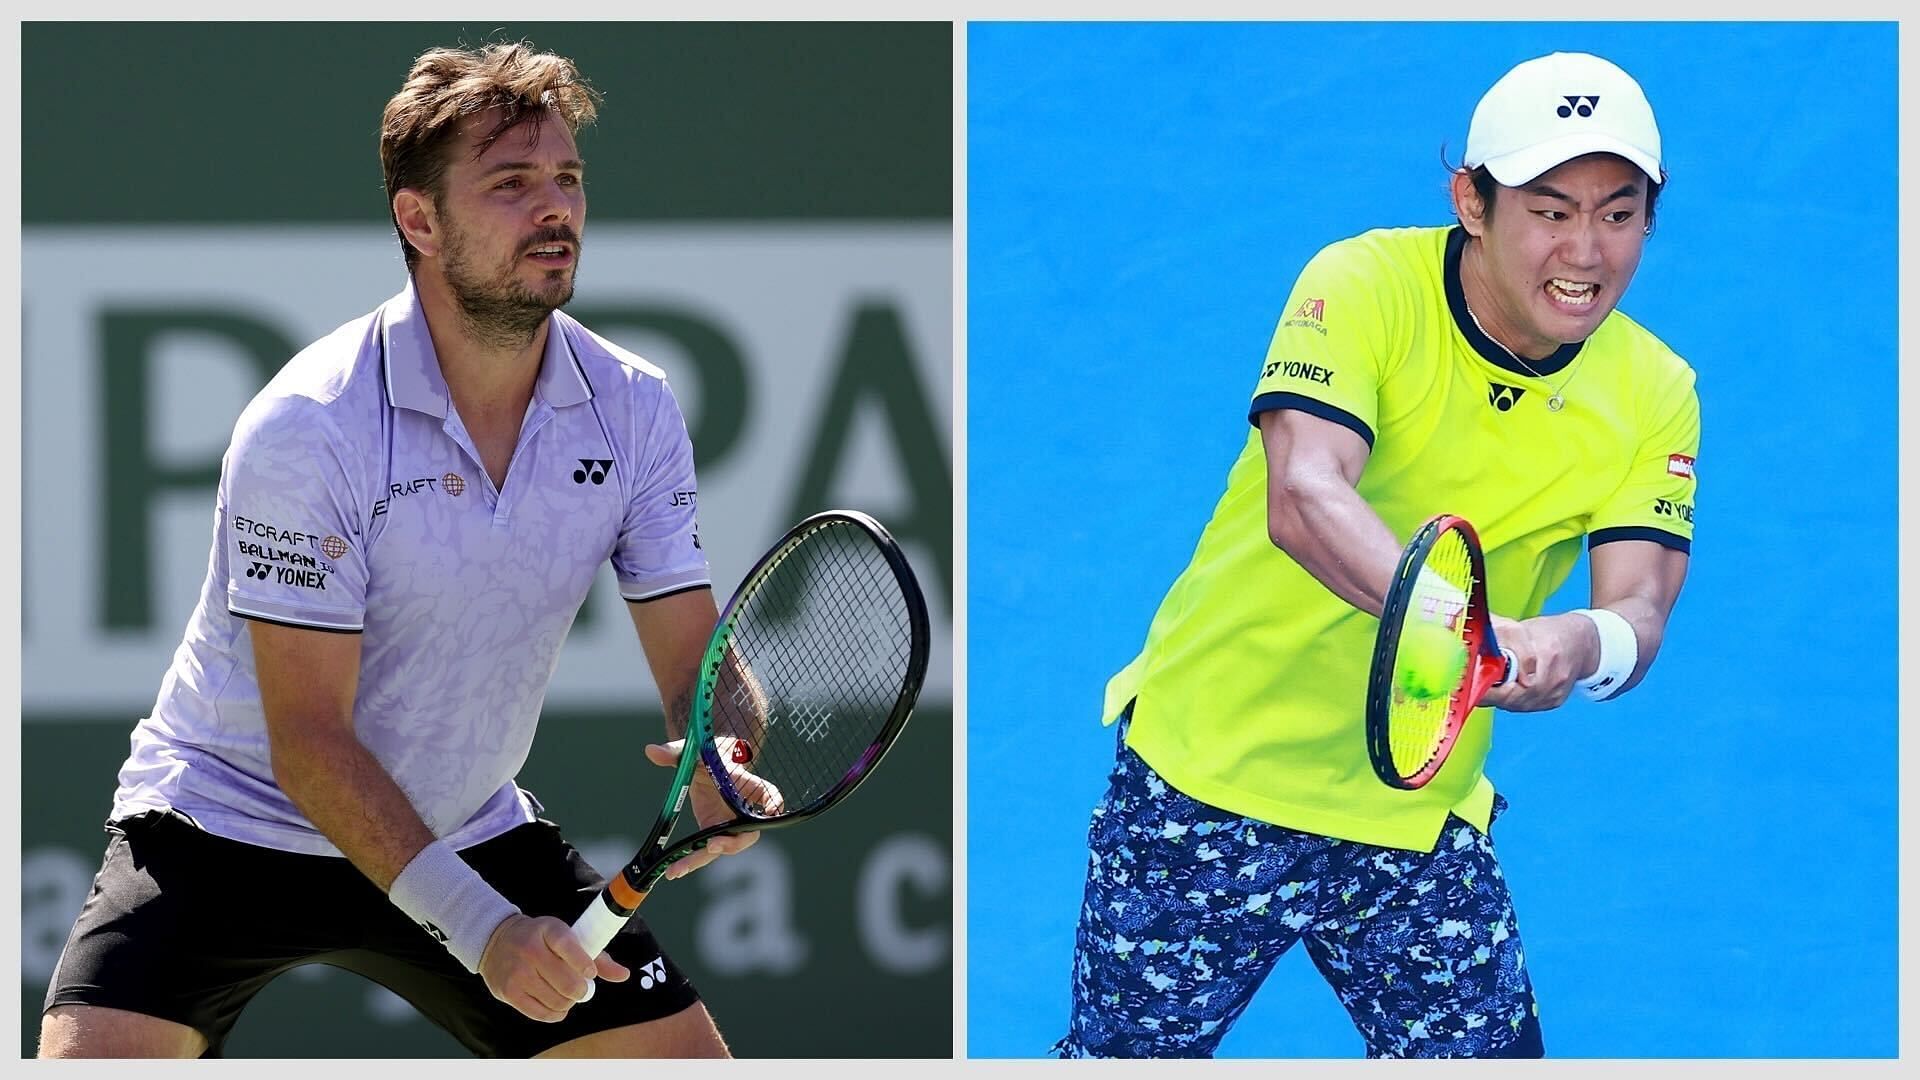 Stan Wawrinka vs Yoshihito Nishioka is one of the first-round matches at the 2023 US Open.